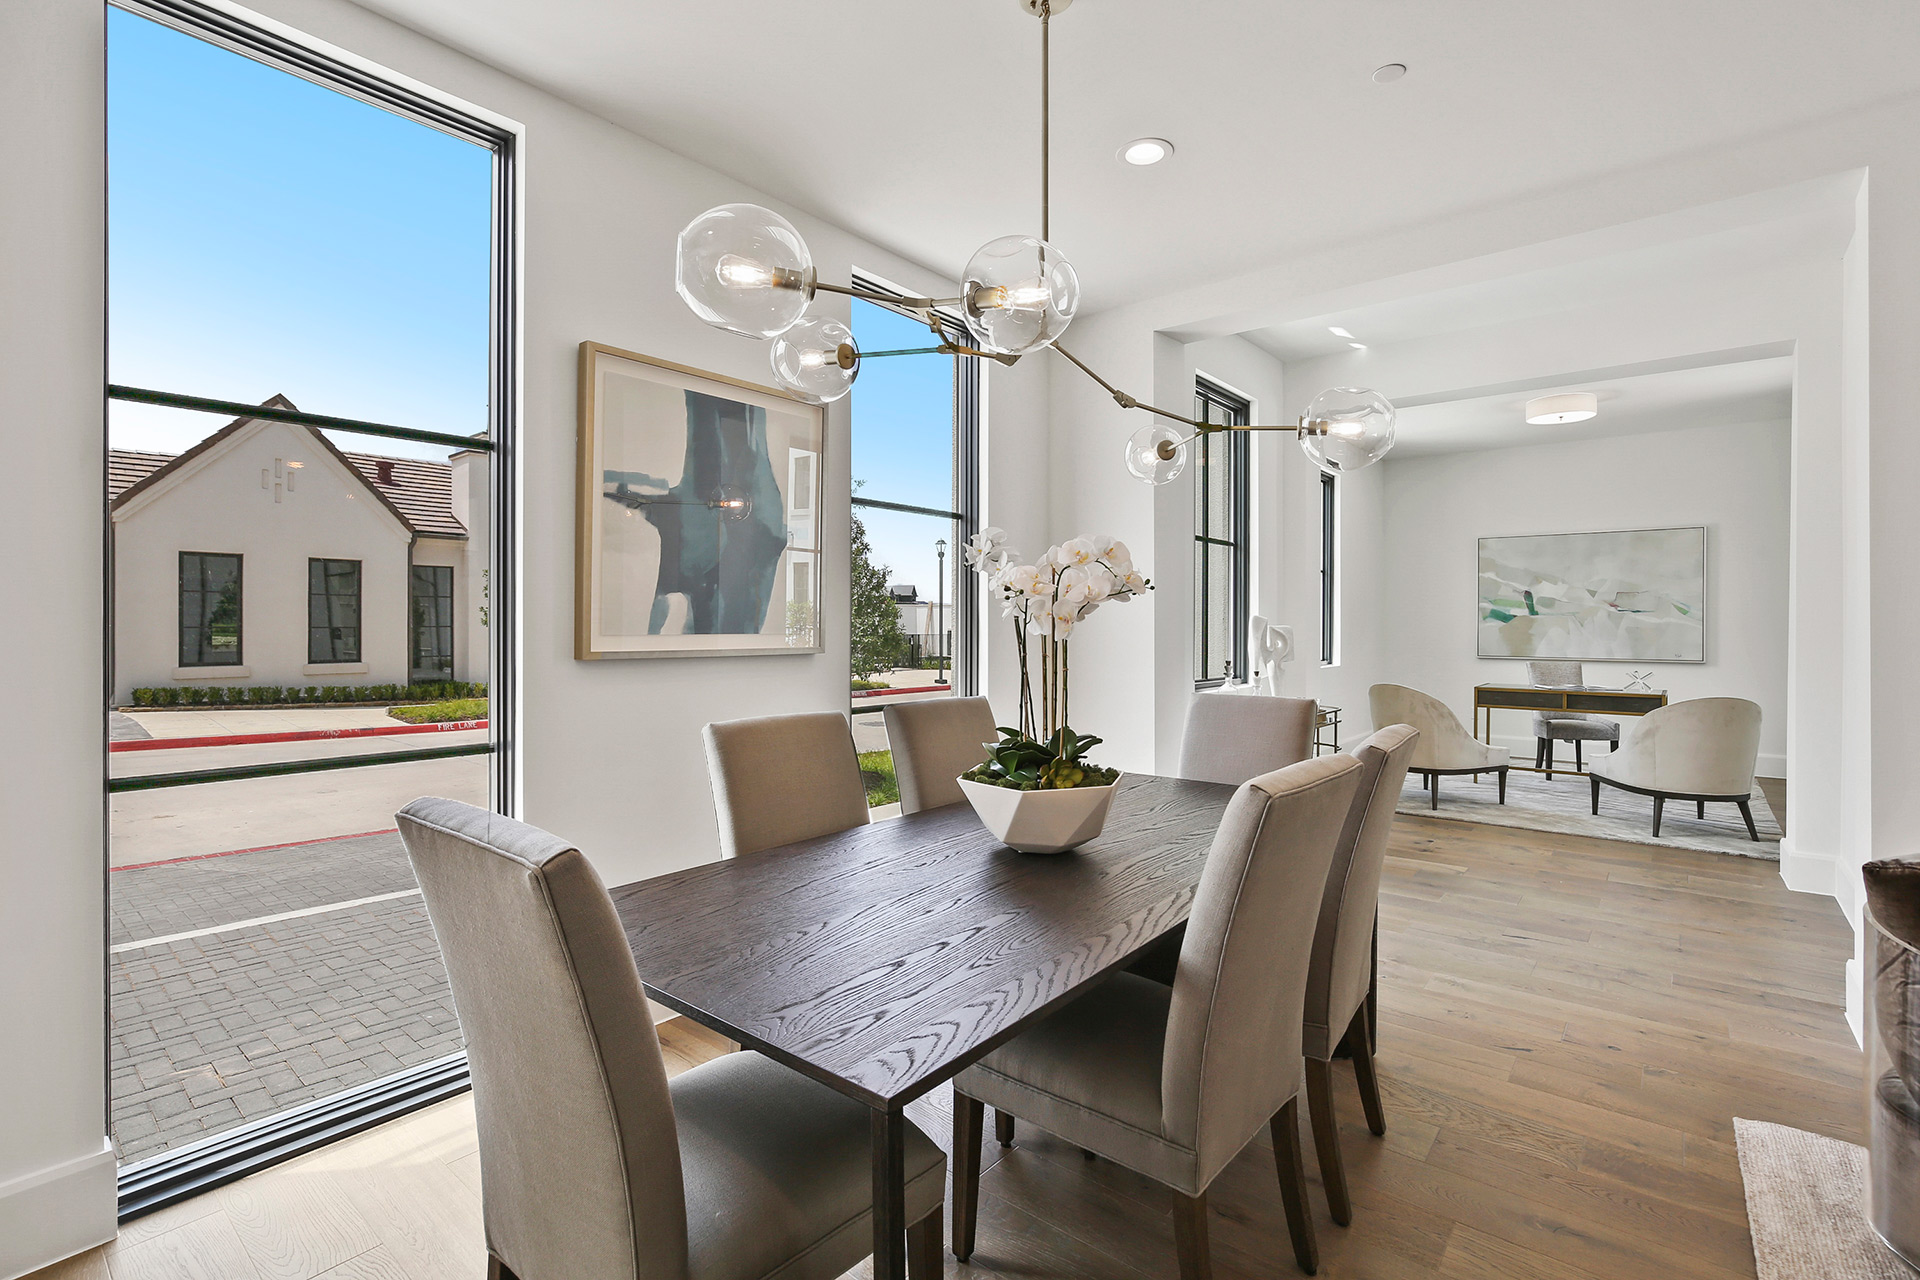 Luxury dining room with large windows in condos at the Corvalla